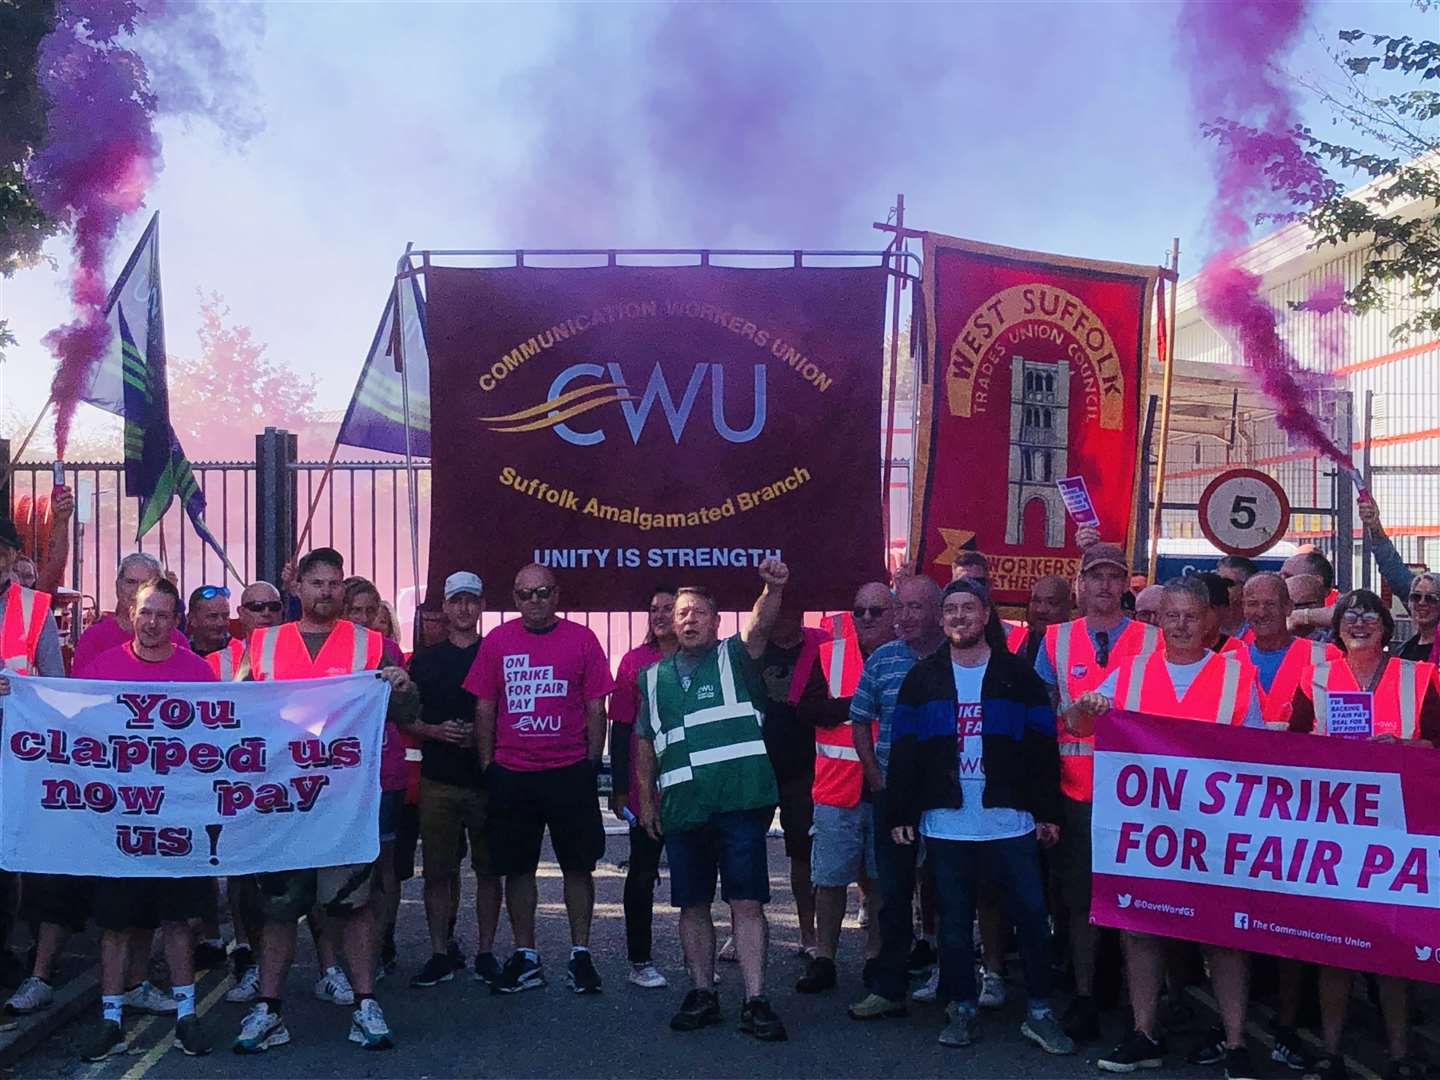 The CWU says the redundancy plan announcement has made its members "more determined than ever before"